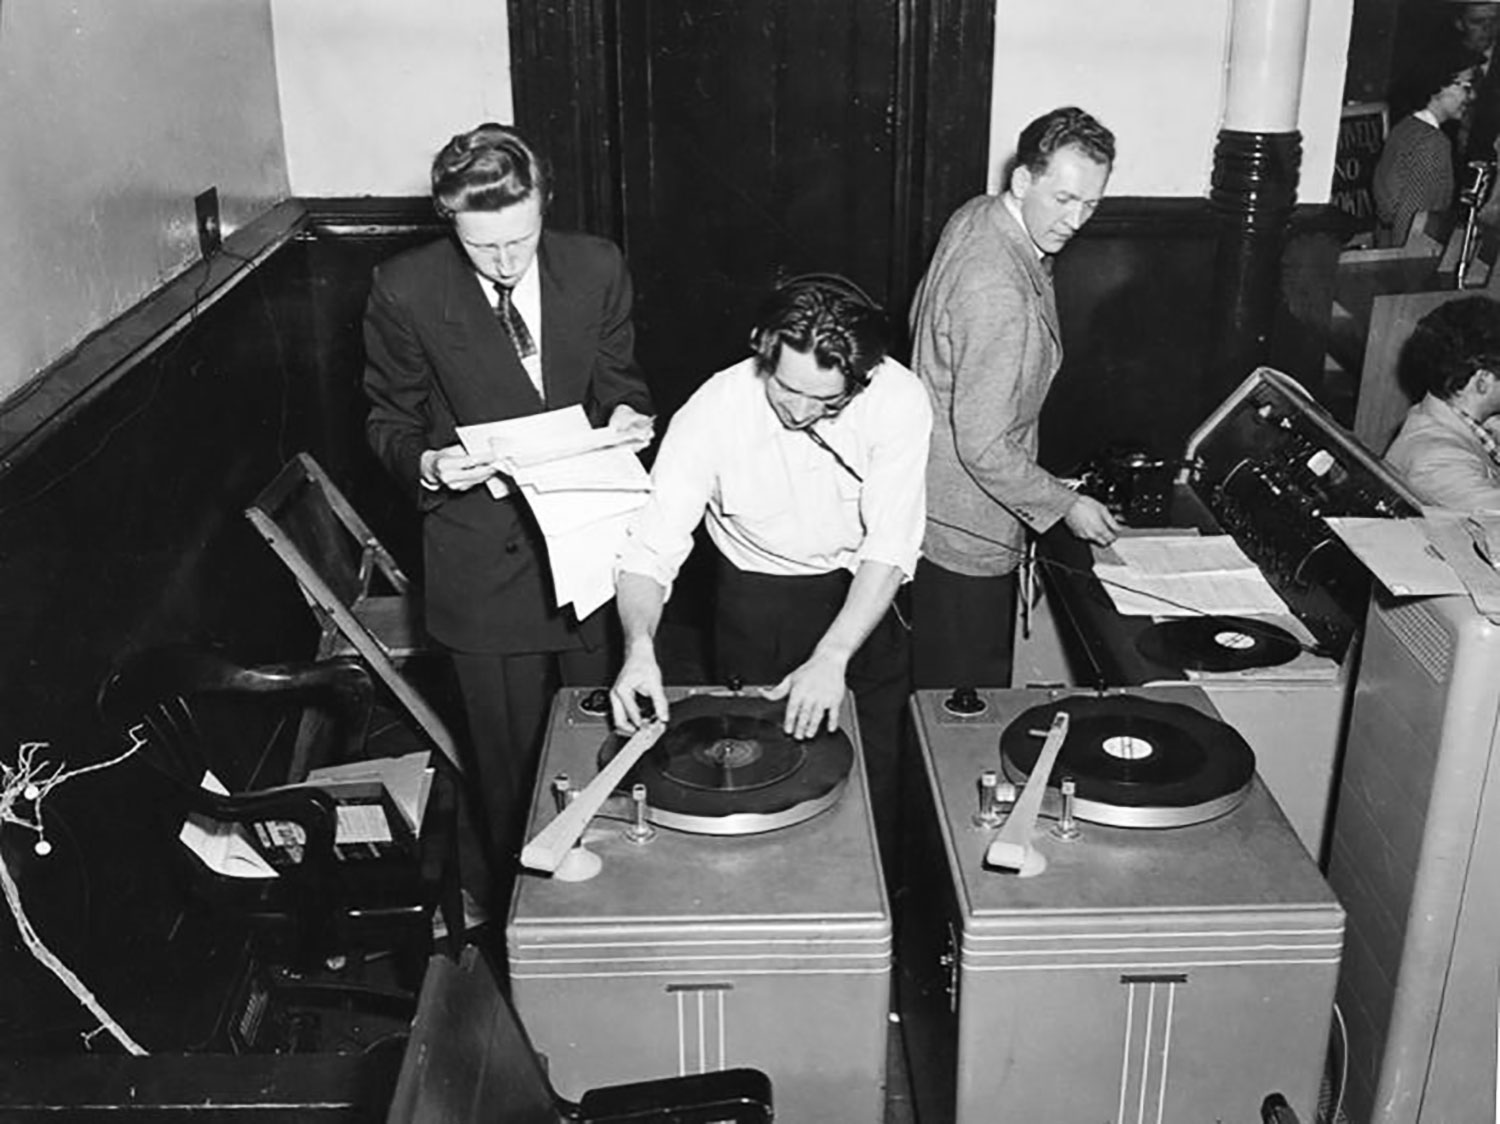 Three students operating large turntables and looking at papers.